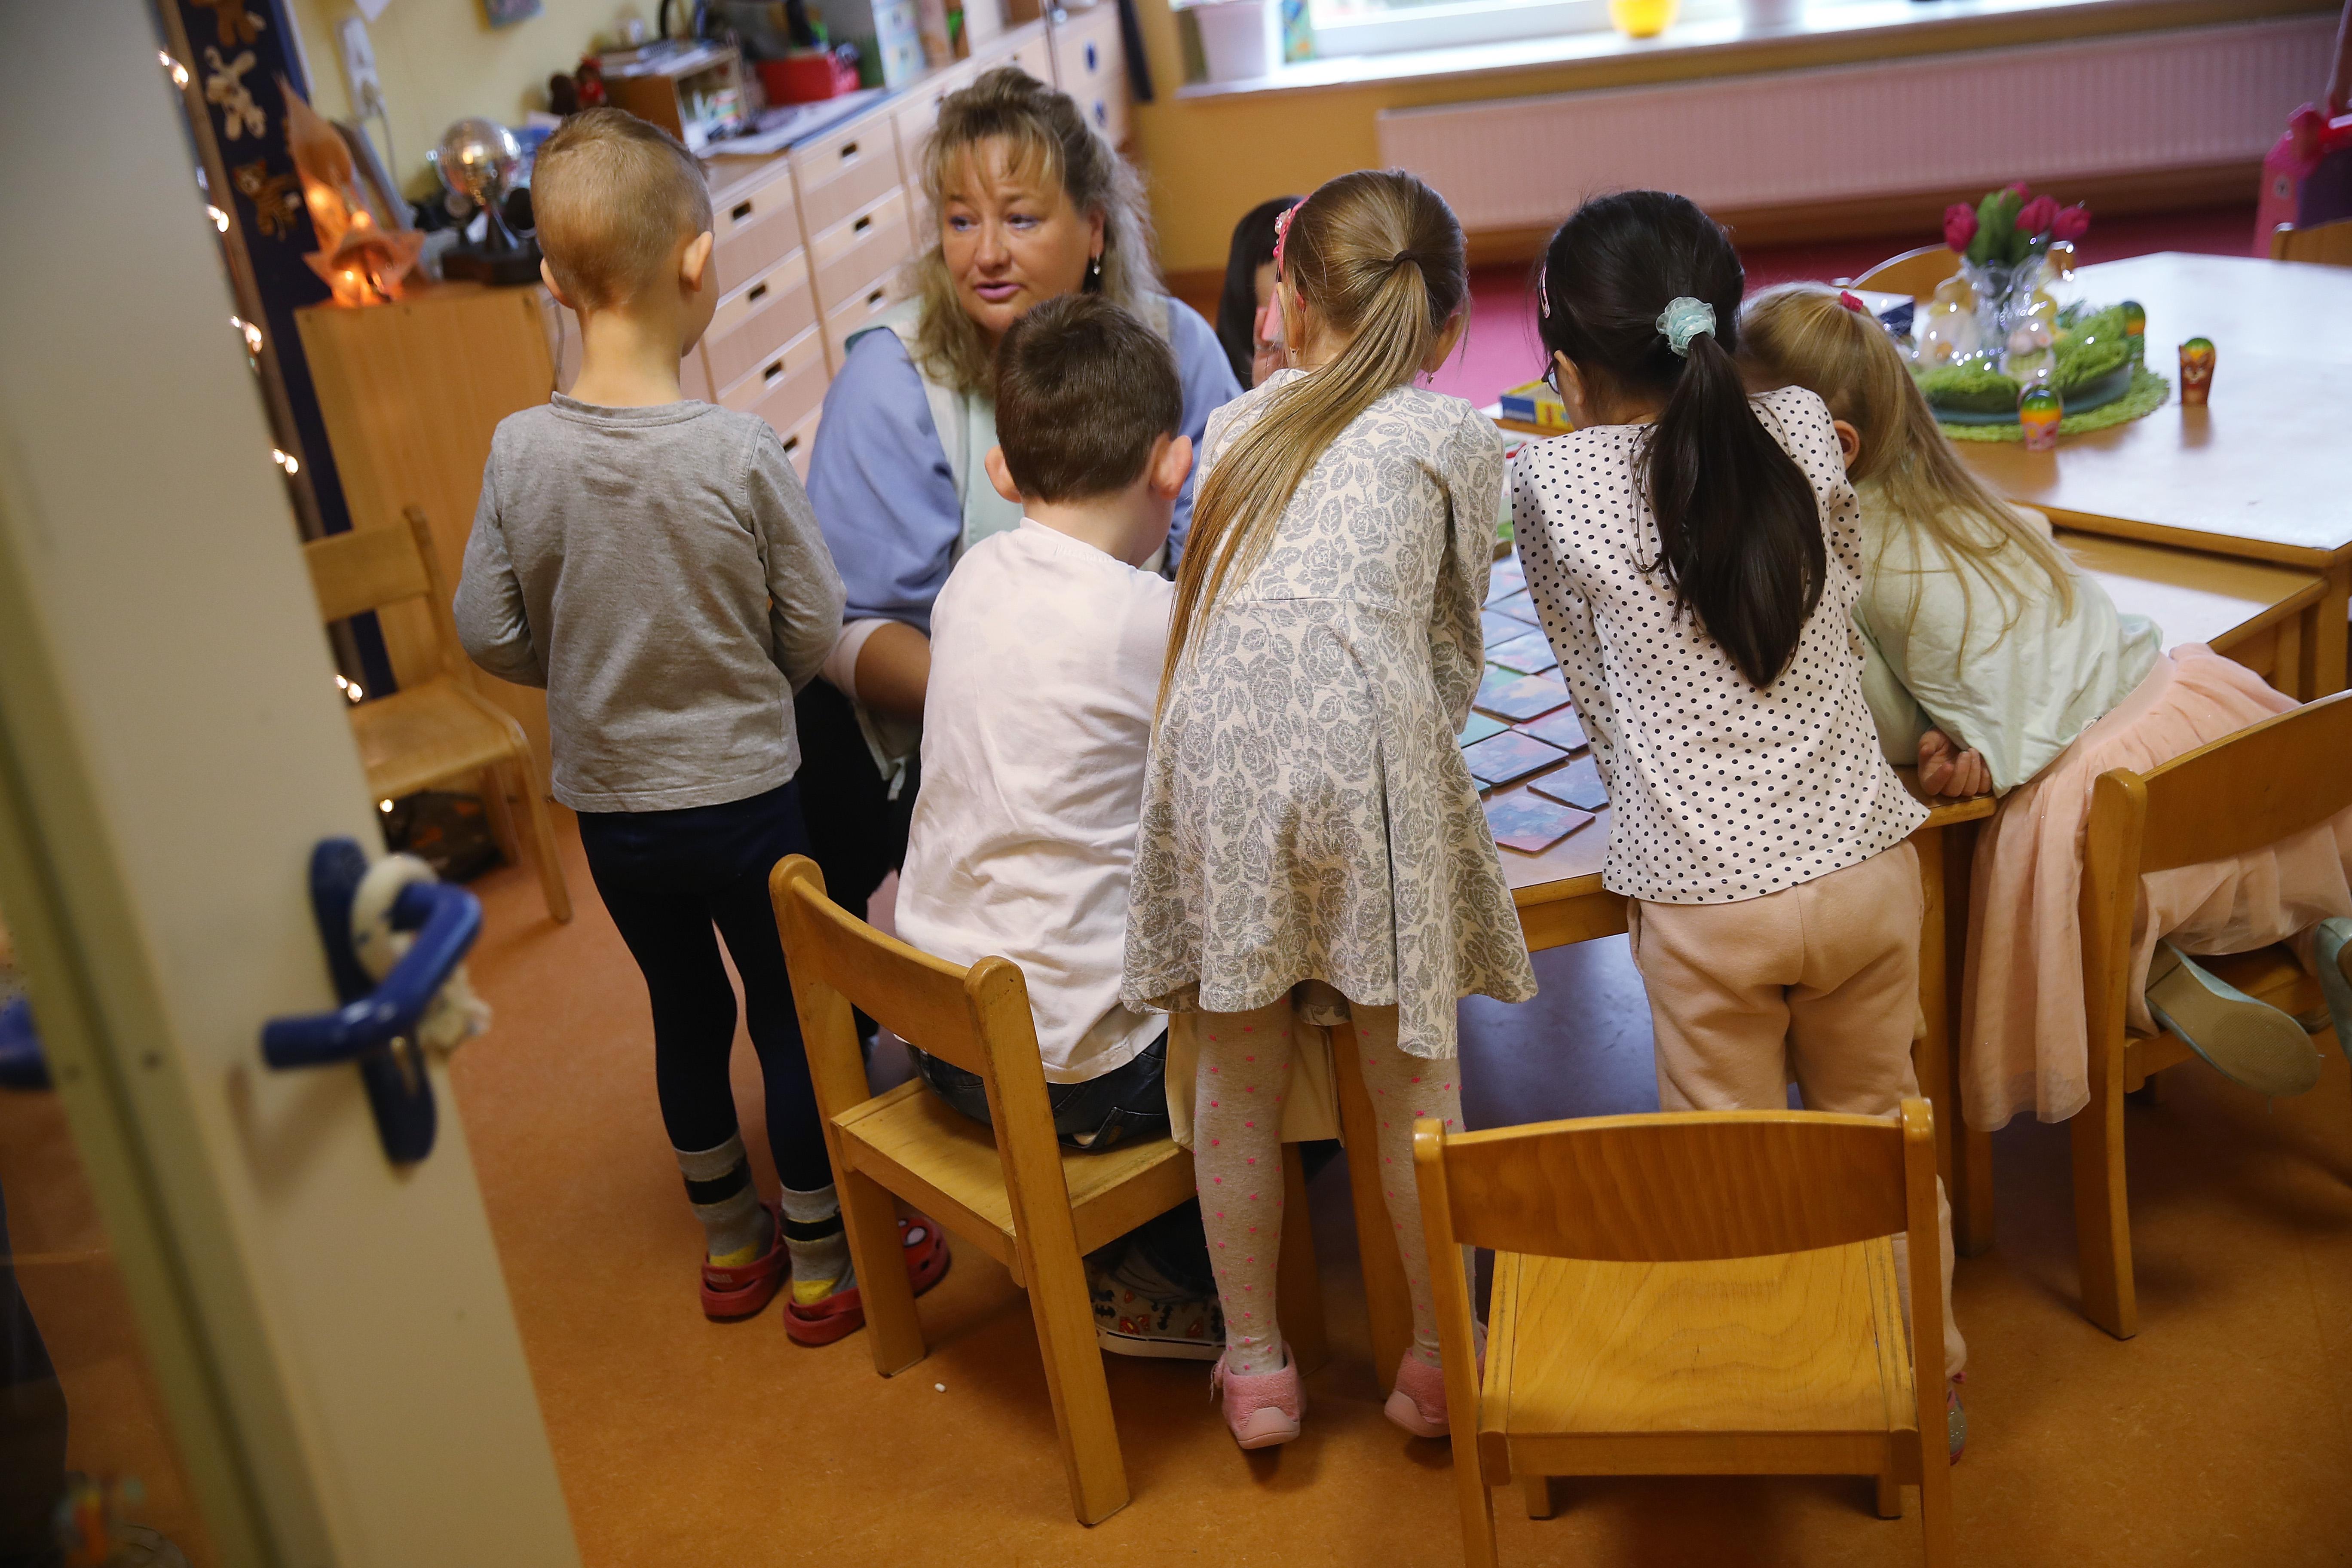 A nursery school teacher supervises children in a day care center with tables and toys.